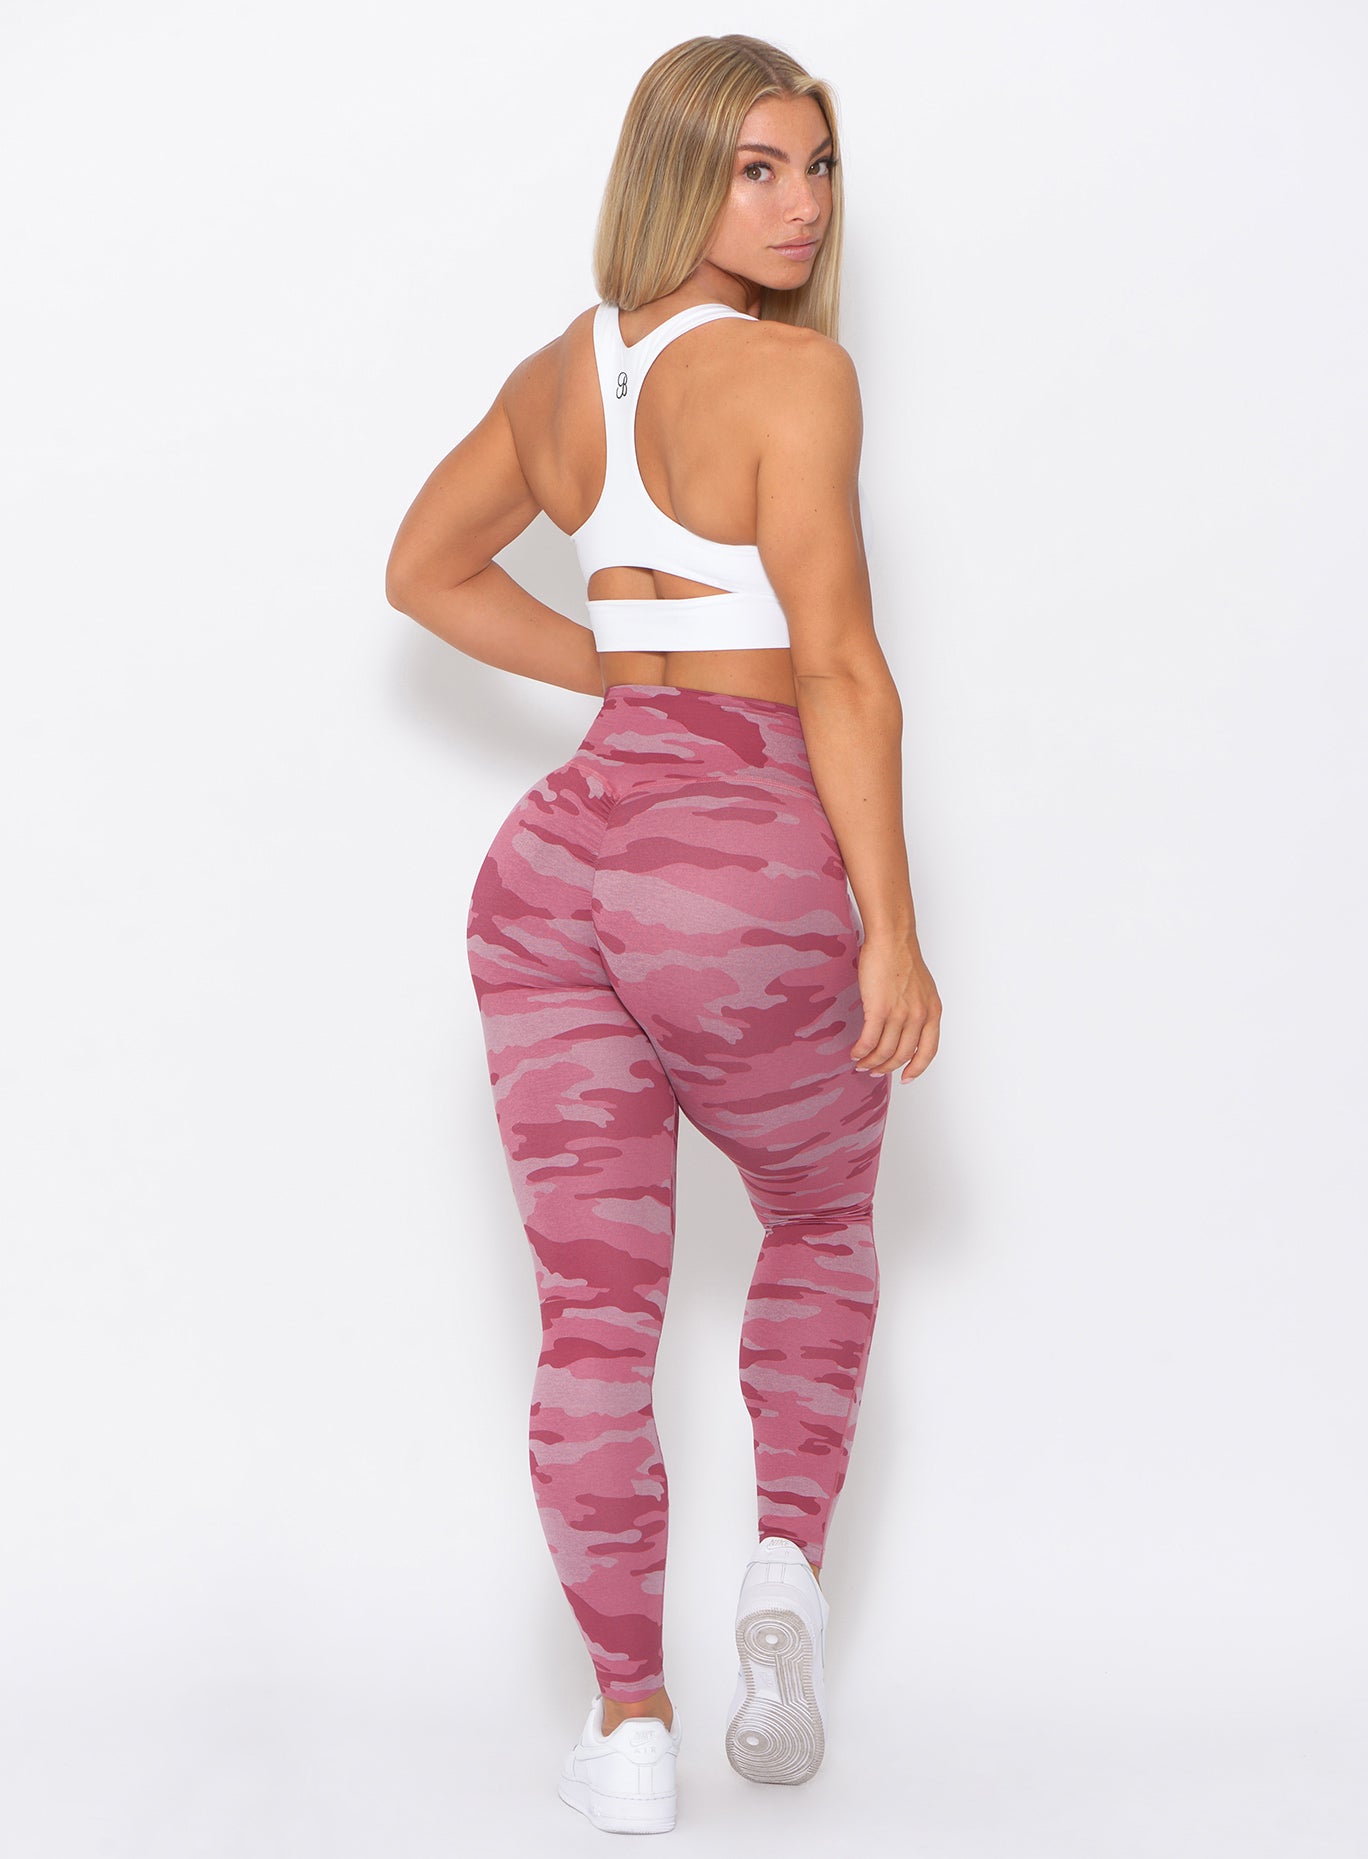 Back view of the model looking backward wearing our fit camo leggings in hibiscus camo color and a white bra